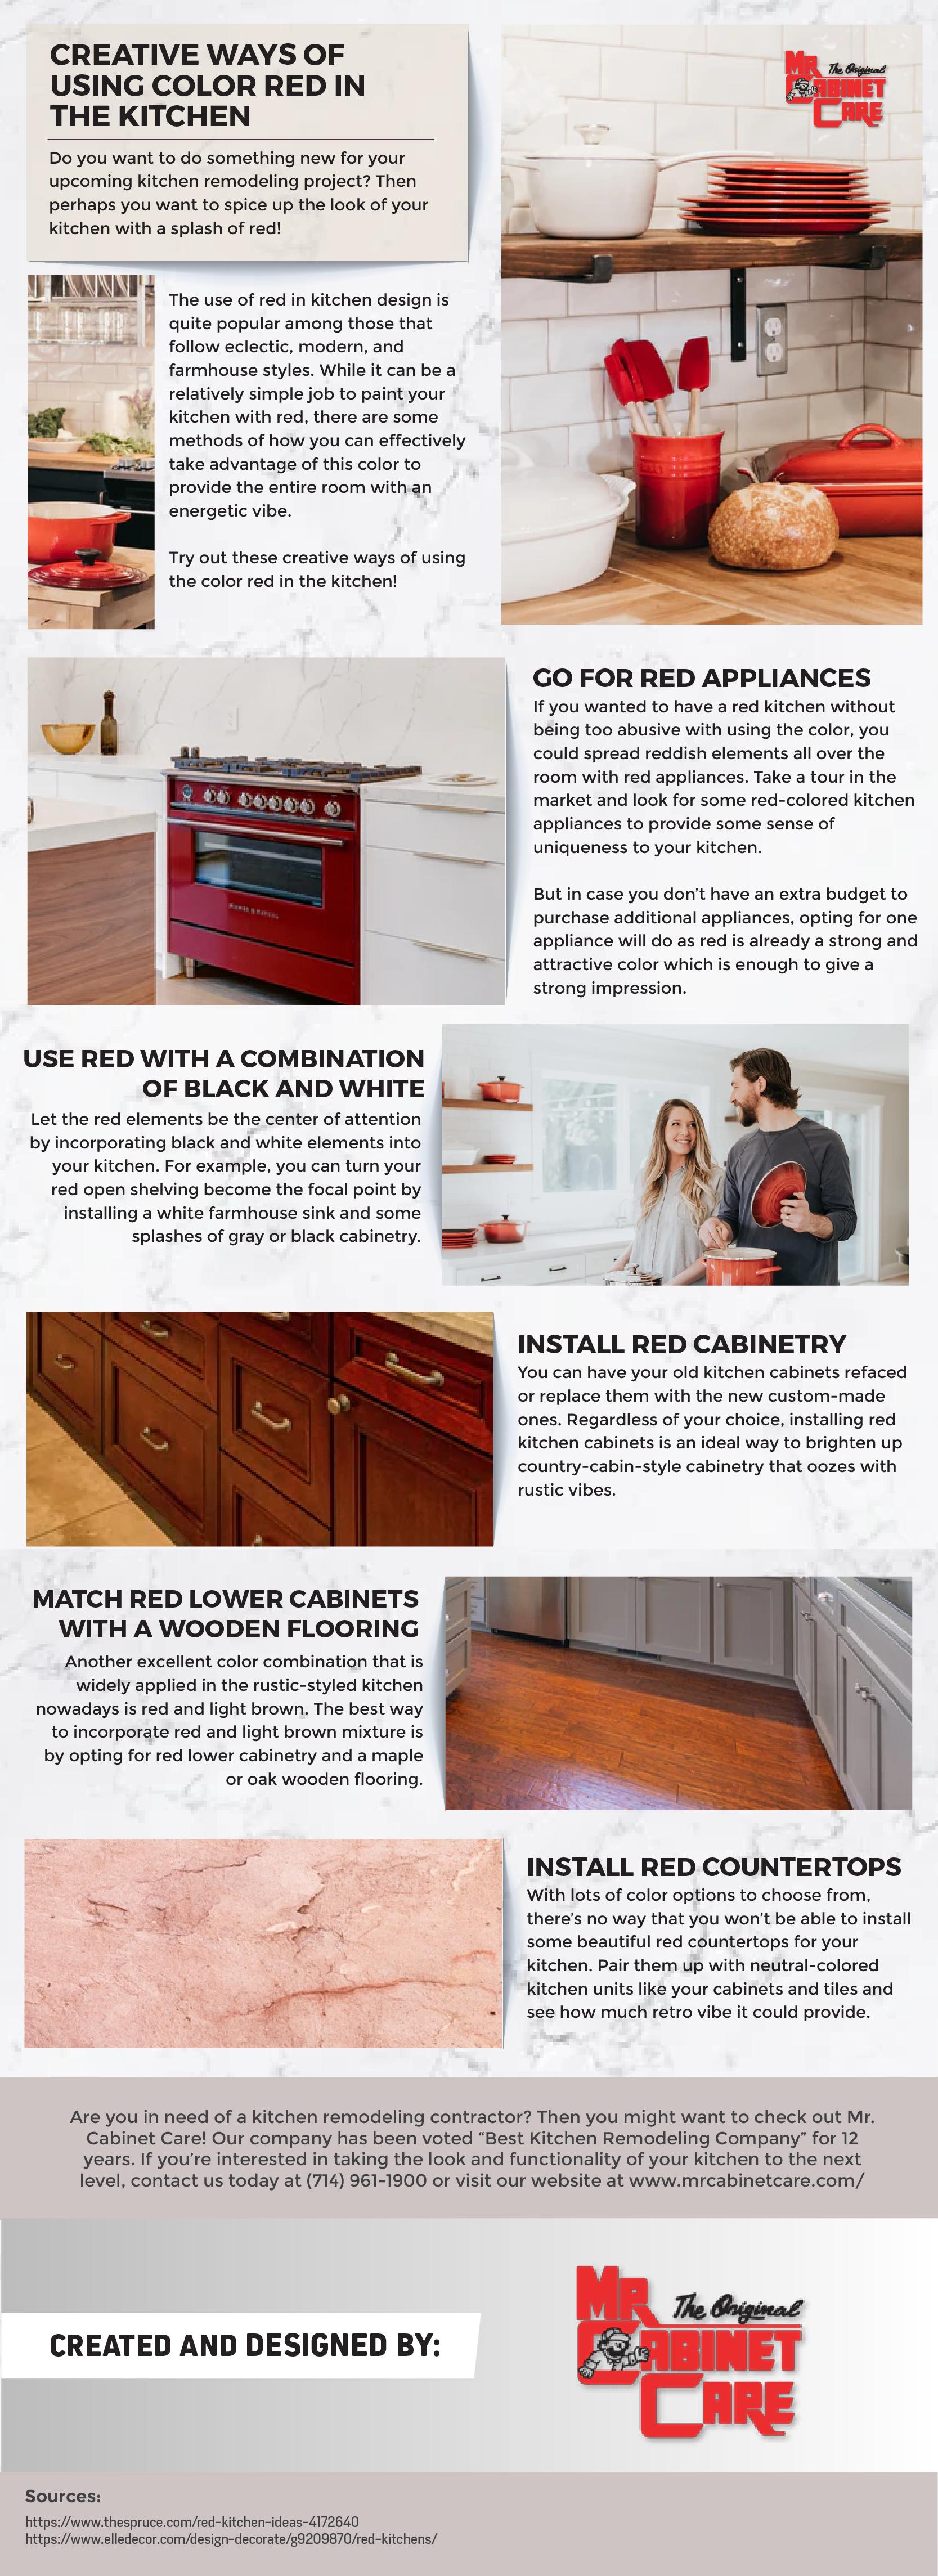 Creative Ways of Using Color Red in the Kitchen - Infographic